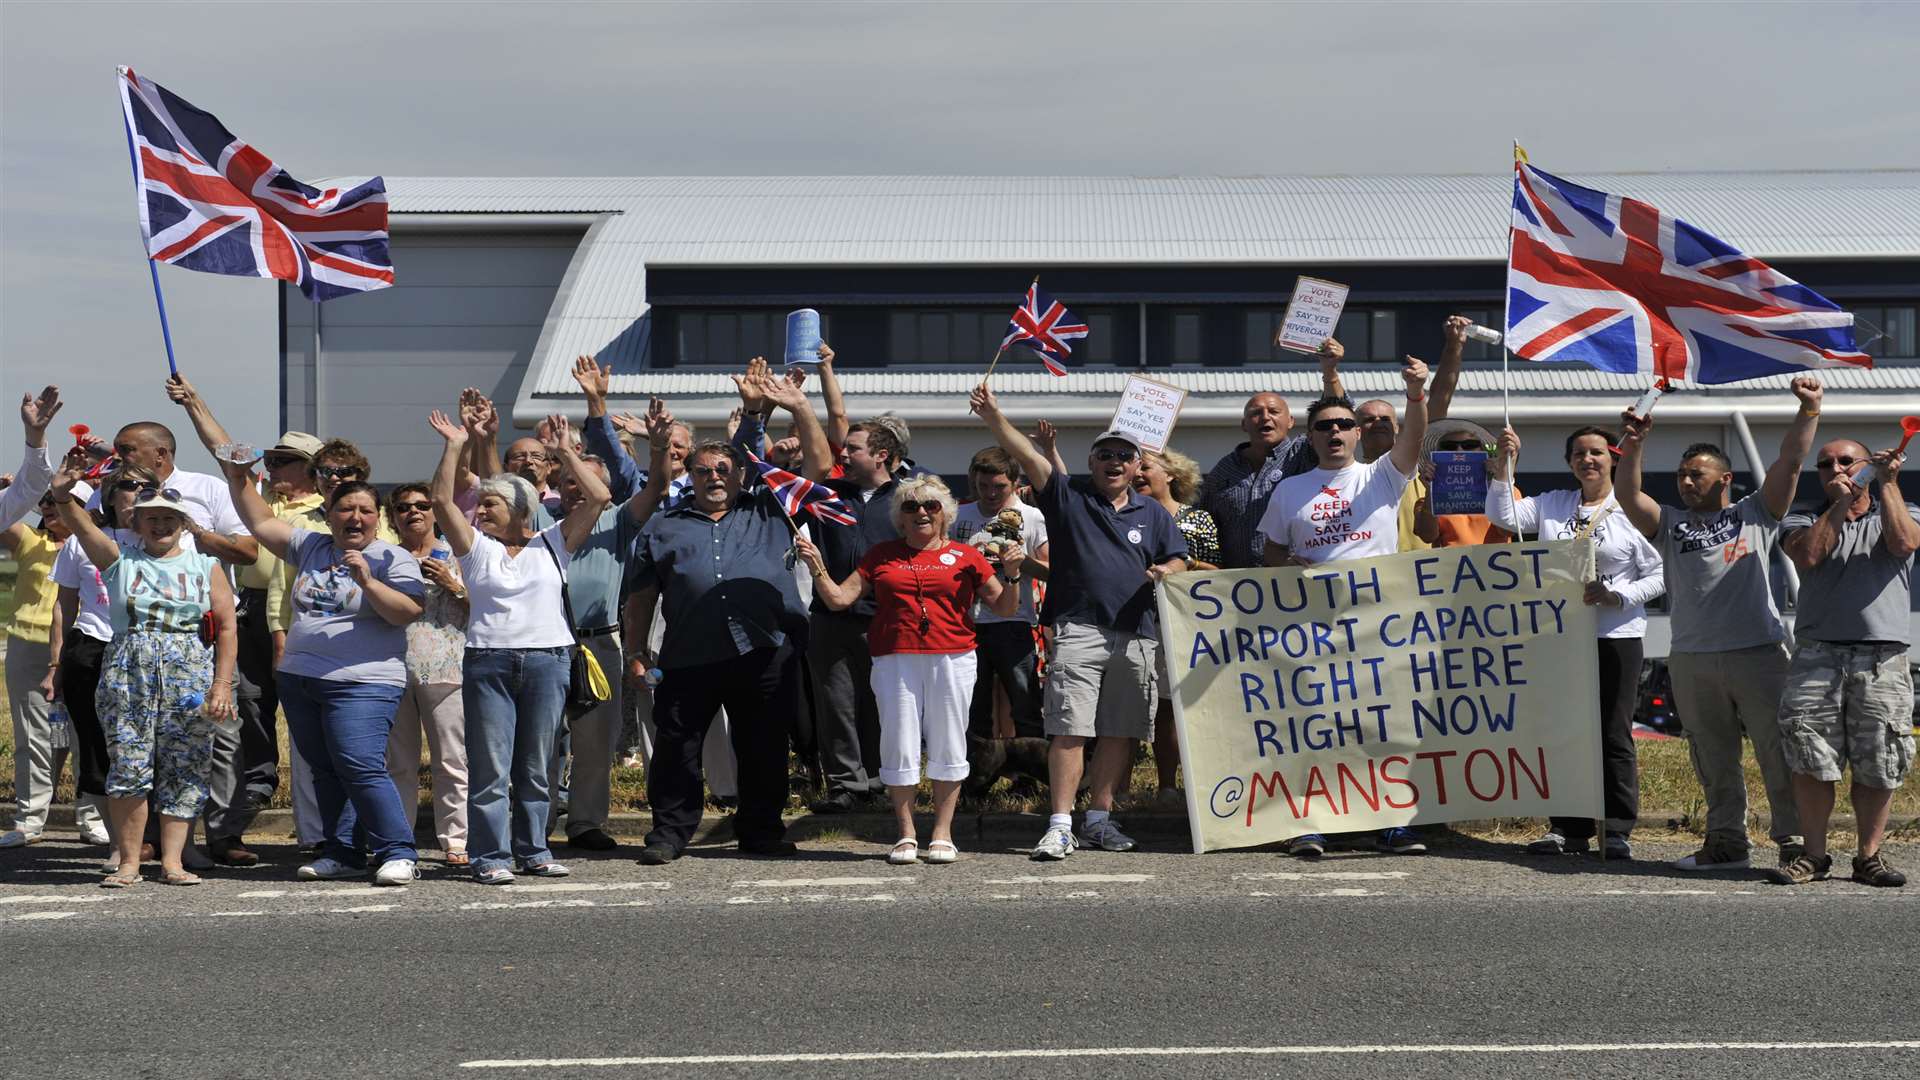 Many campaigners still want Manston to reopen as an airport